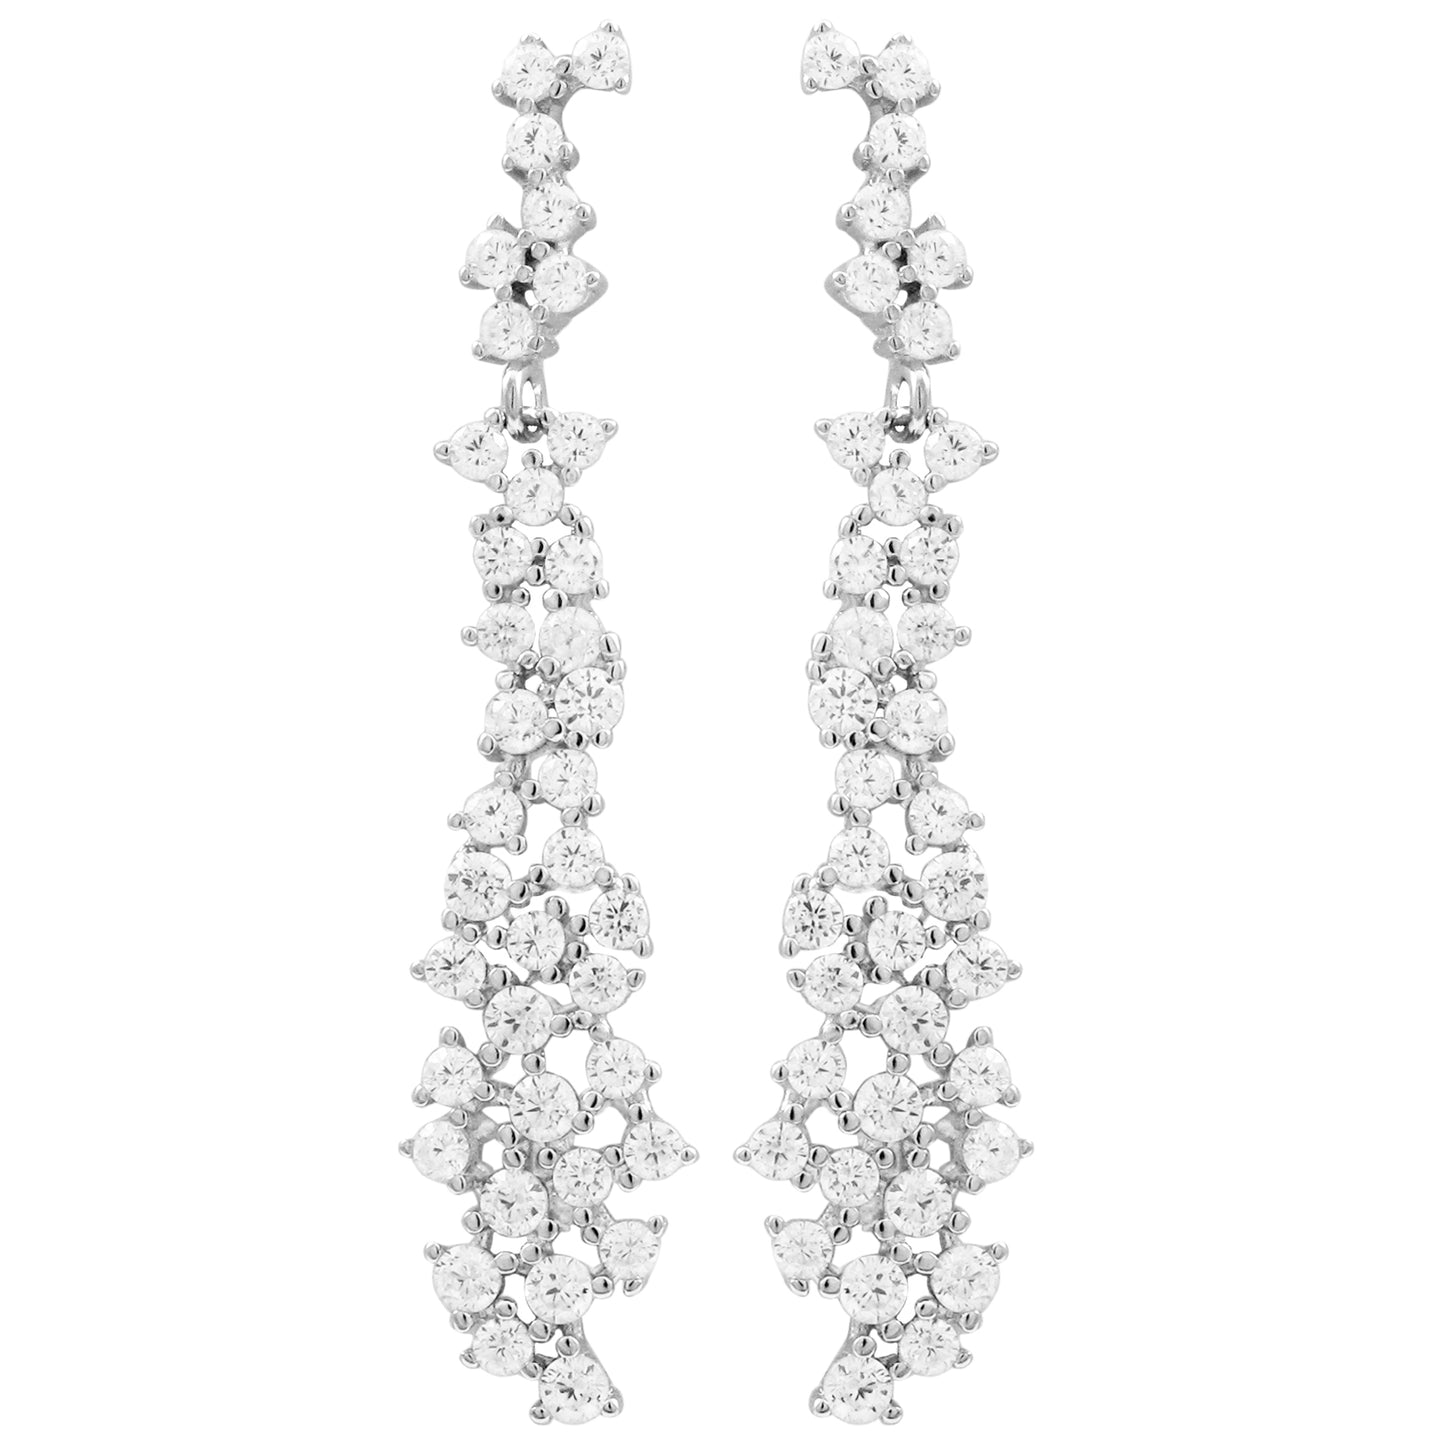 RHODIUM PLATED STERLING SILVER, WHITE CZ POST EARRINGS - HK Jewels